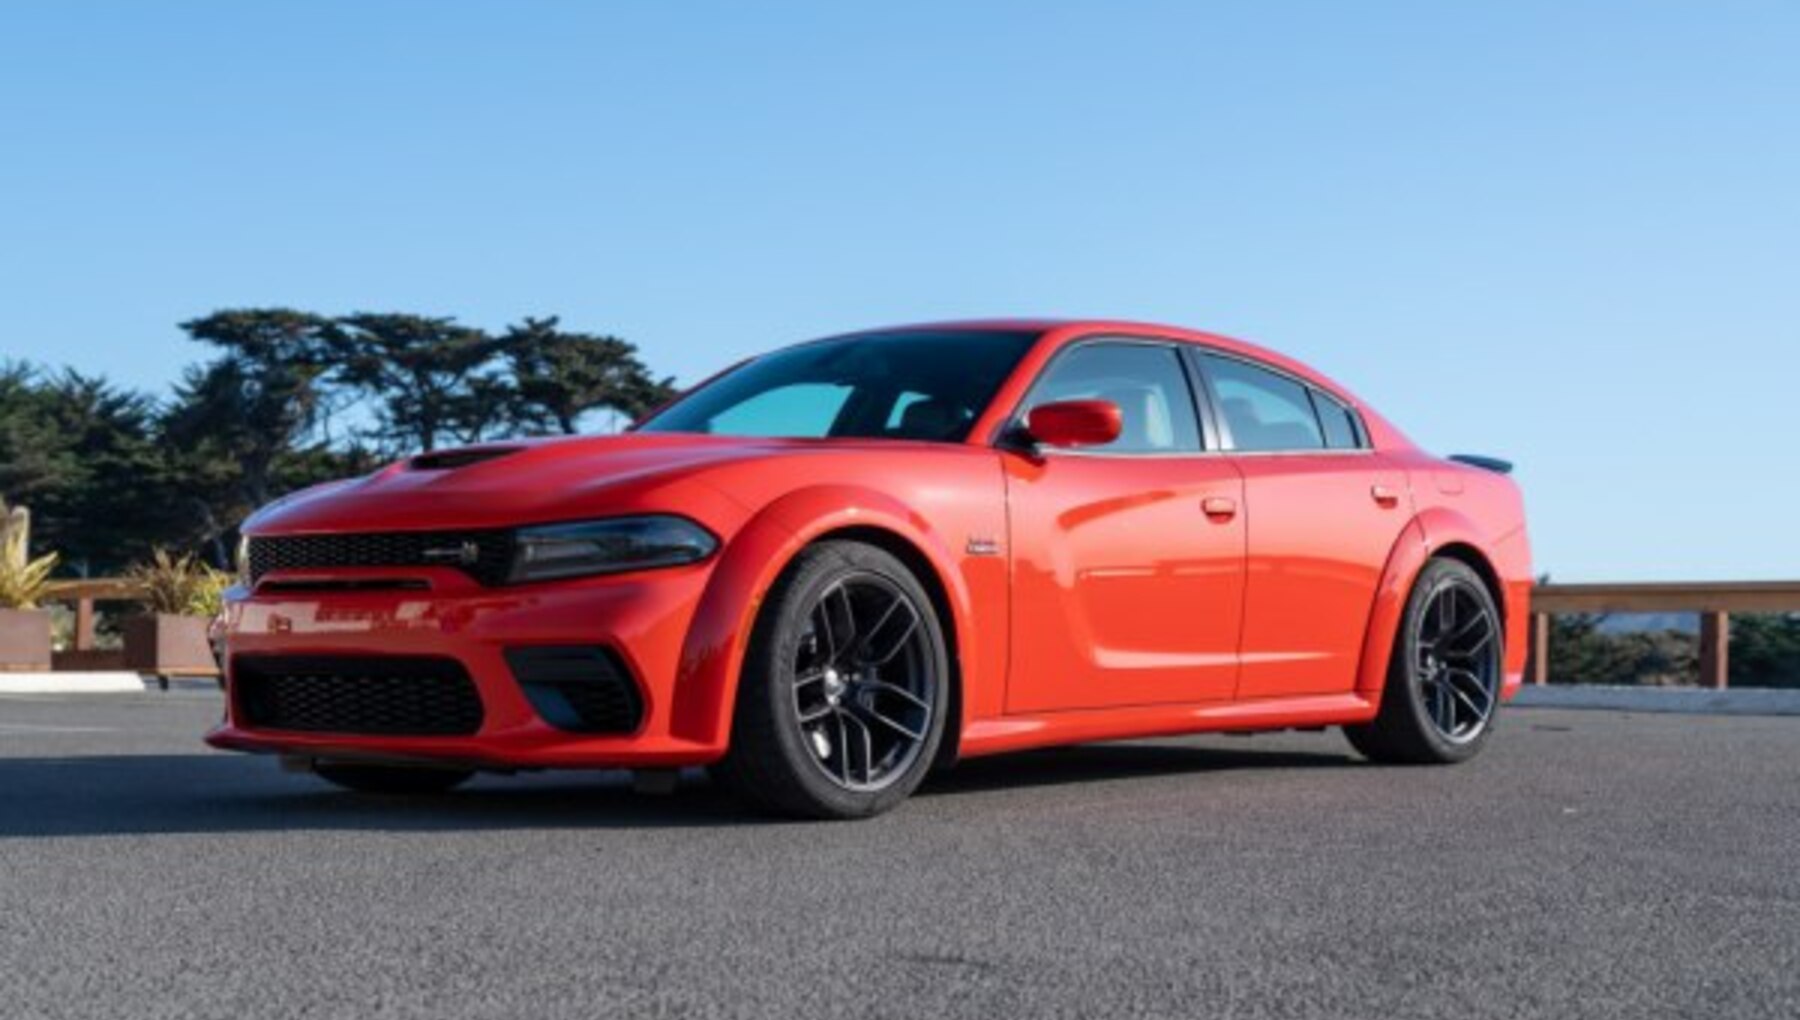 Dodge Charger VII (LD; facelift 2019) R/T 5.7 HEMI V8 (370 Hp) Automatic 2019, 2020, 2021 